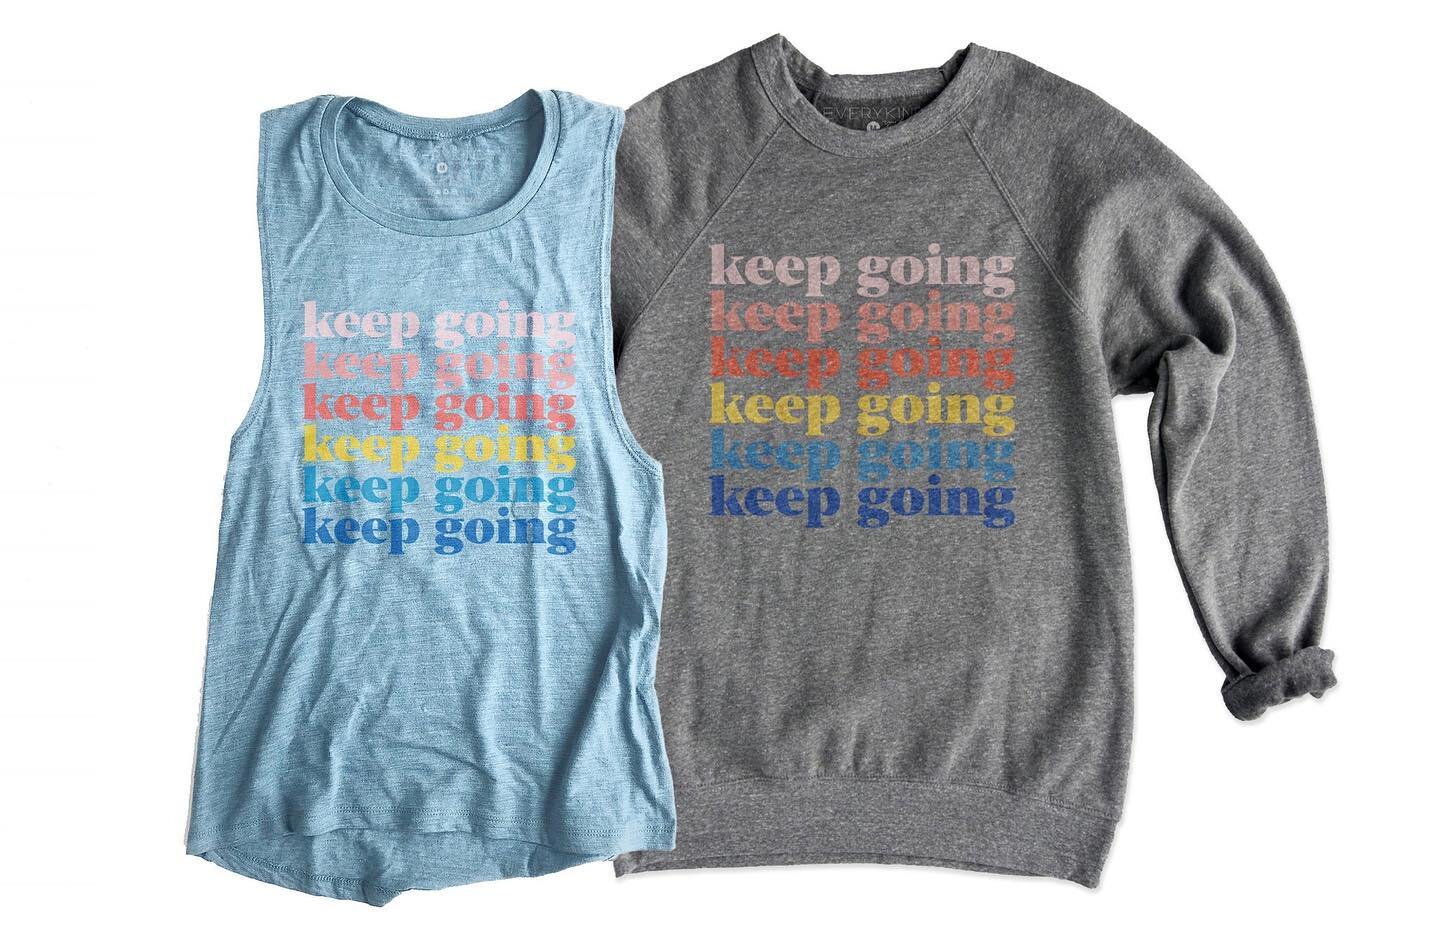 The days are long, but the years are short! That&rsquo;s what everyone keeps telling us right? Well whatever stage you&rsquo;re in, keep going! We&rsquo;ve got you! 💛
⠀⠀⠀⠀⠀⠀⠀⠀⠀
30% off the whole shop with code: MOMSROCK
⠀⠀⠀⠀⠀⠀⠀⠀⠀
#keepgoing #momsroc